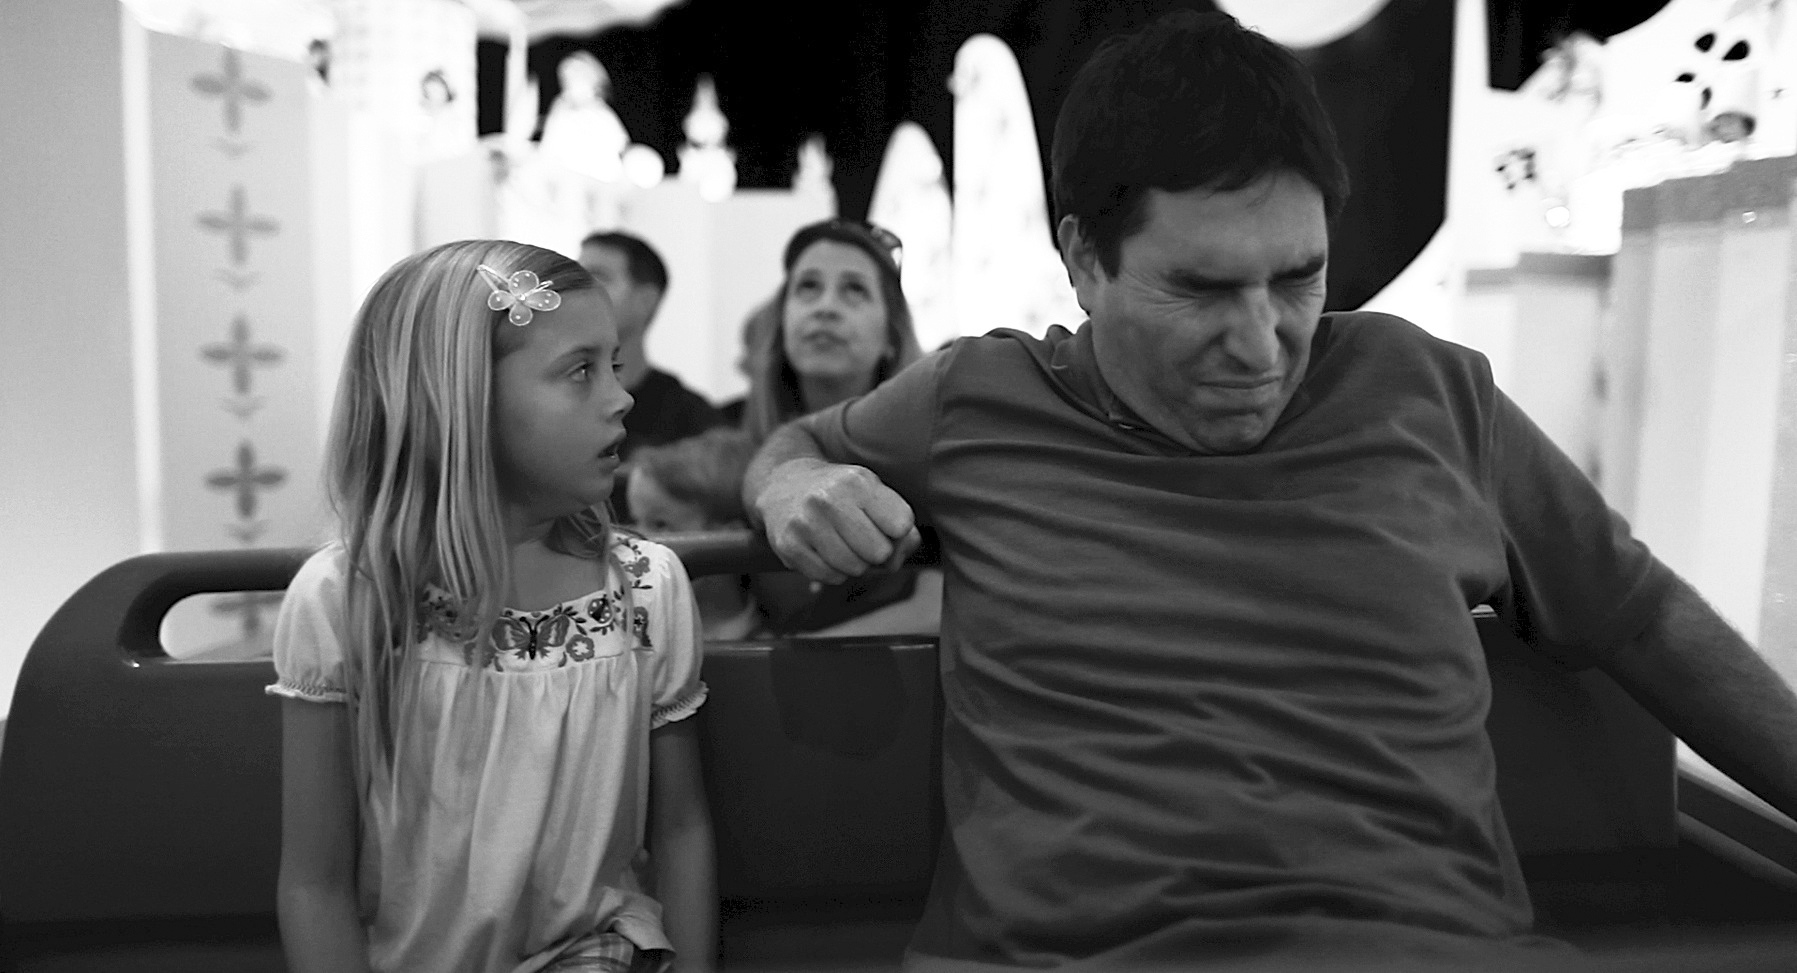 Roy Abramsohn as Jim freaks out during a ride in the amusement park on the last day of his family vacation in a scene from &quot;Escape from Tomorrow,&quot; a feature film by writer/director Randy Moore.